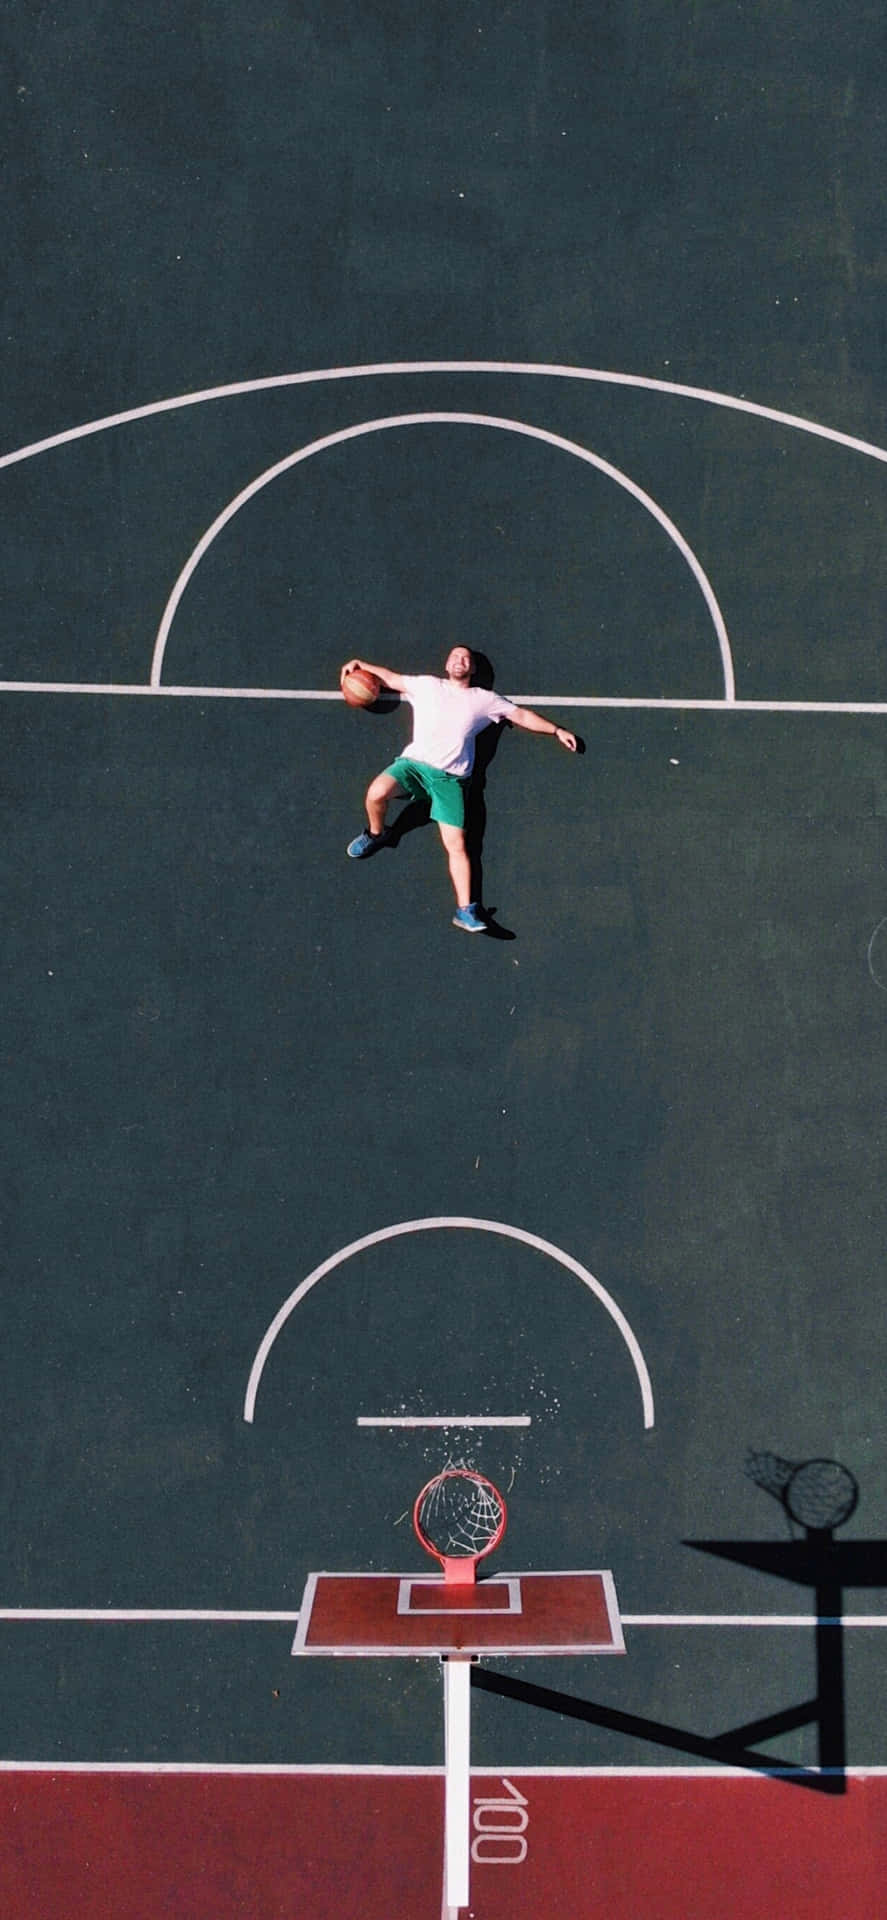 Iphone Xs Basketball Laying Down Background